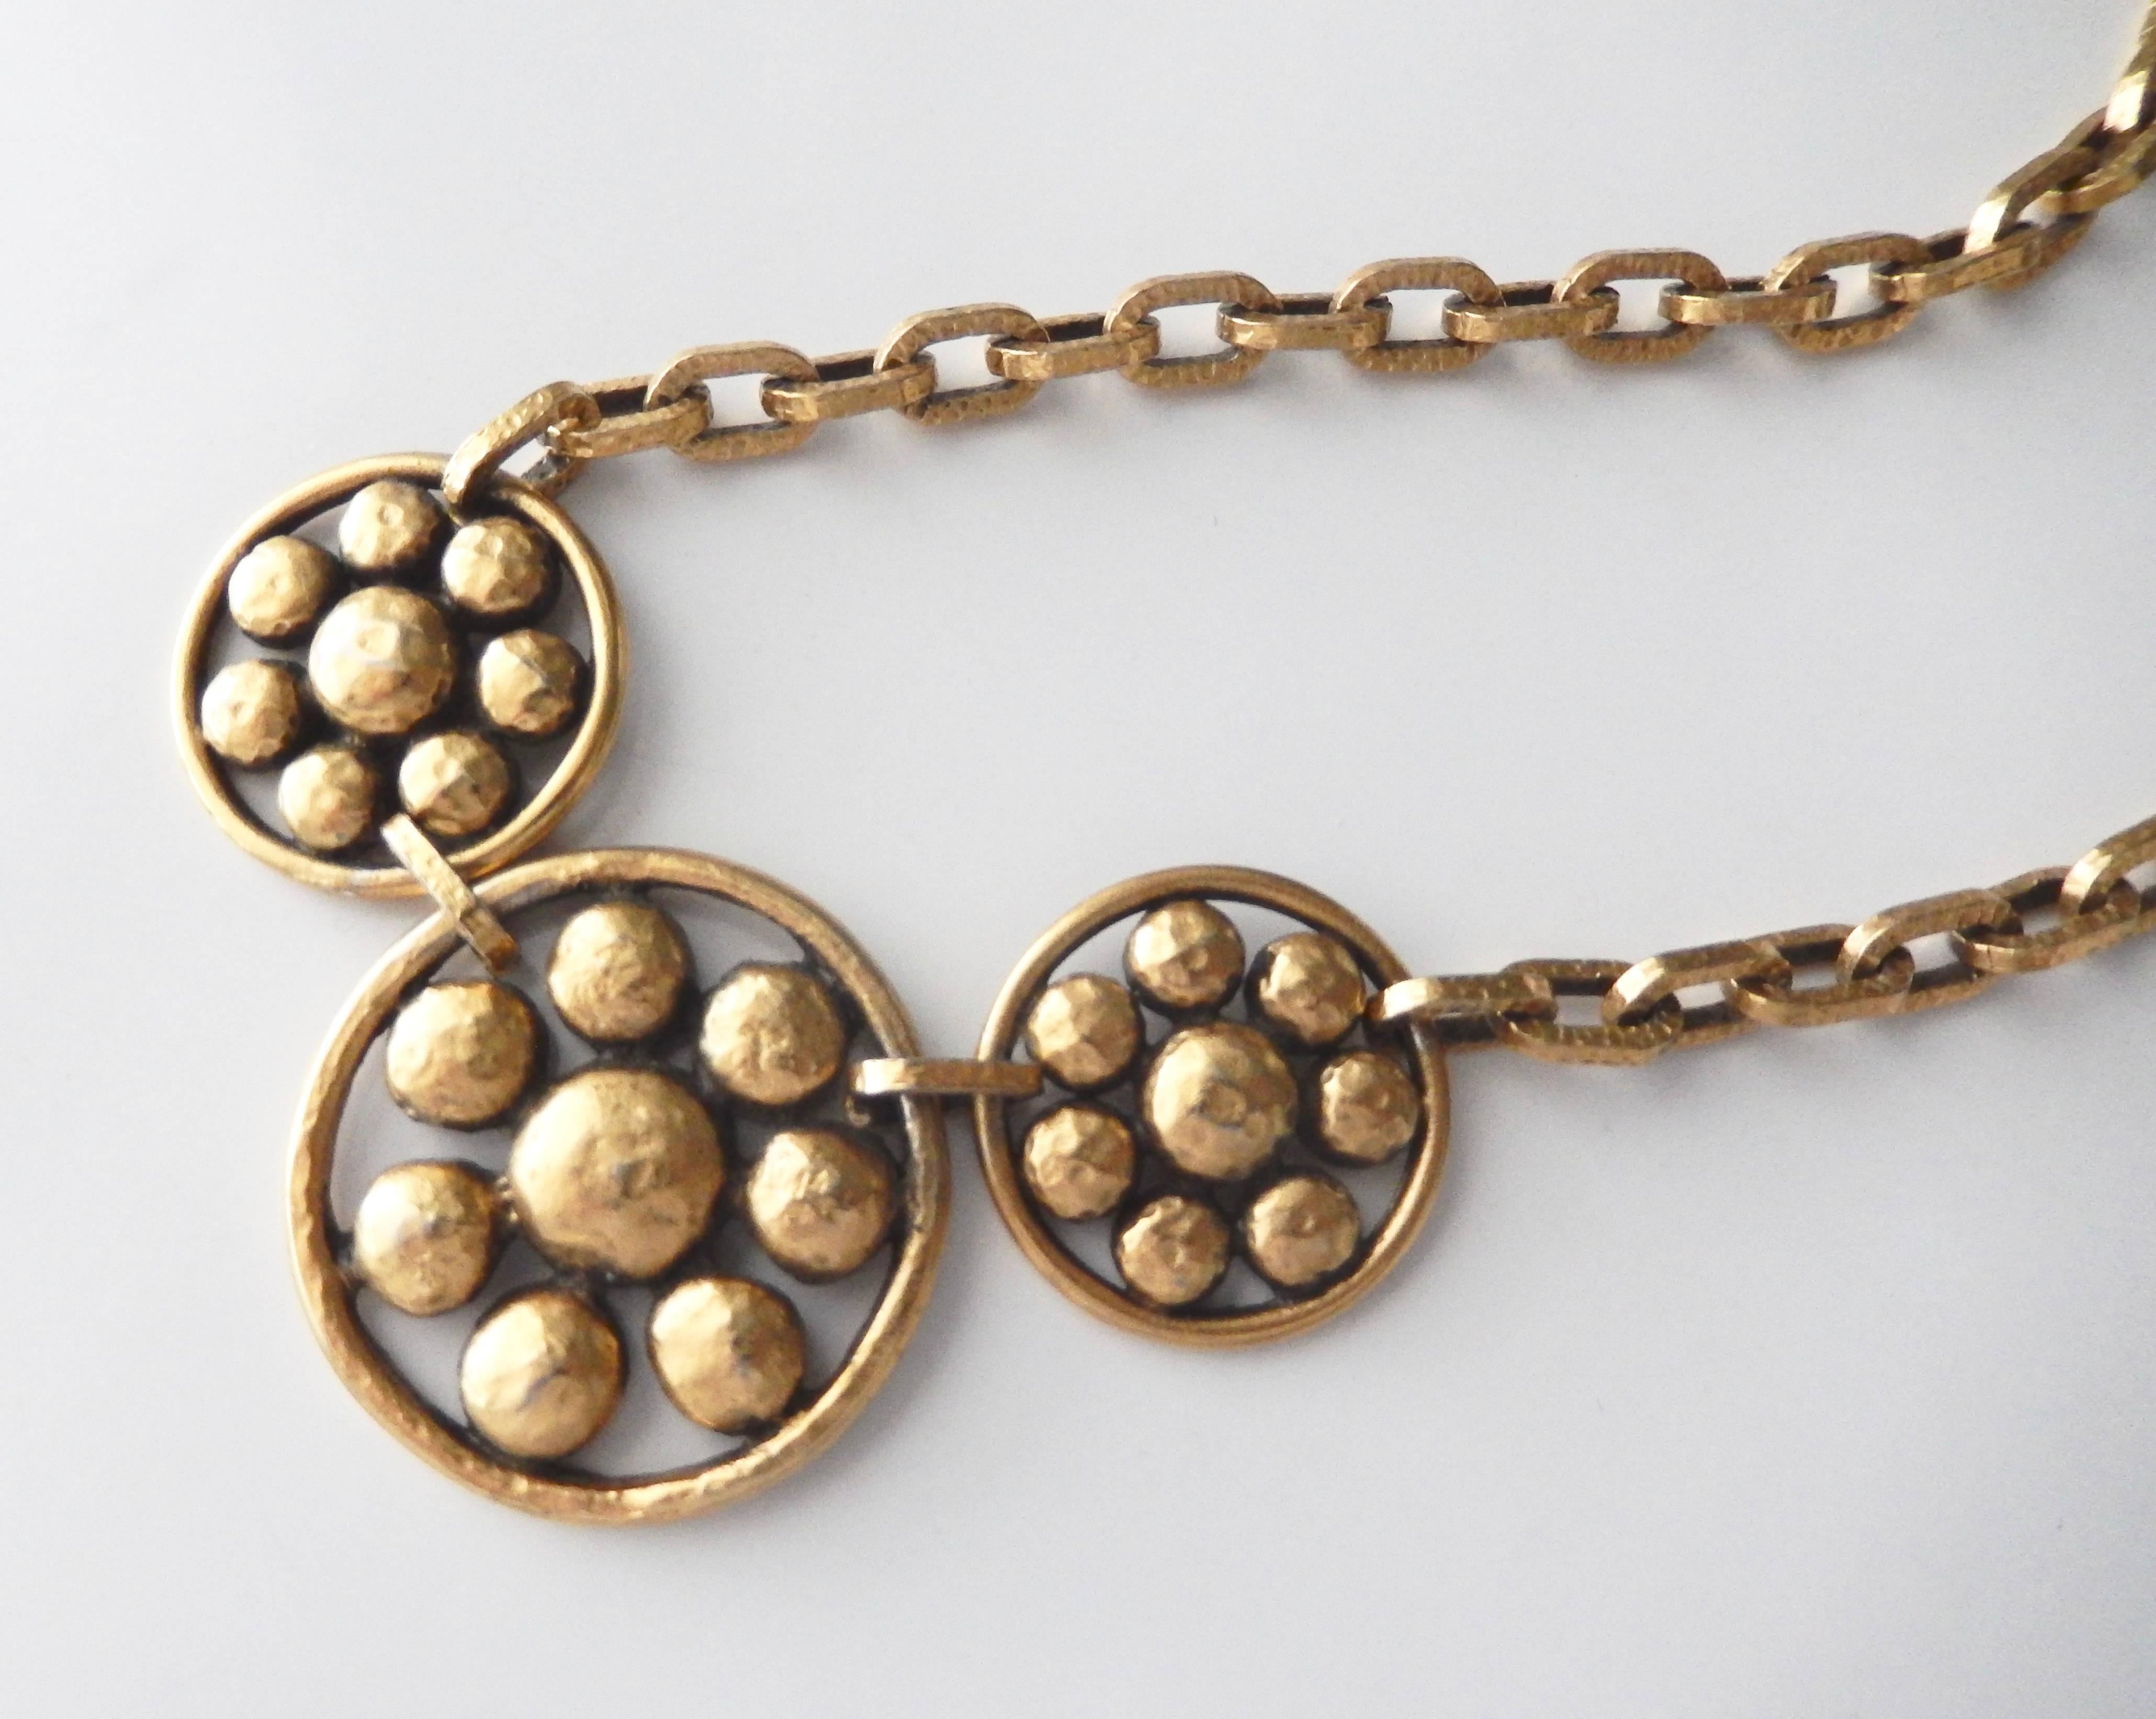 Yves Saint Laurent Stylized Floral Necklace, 1980s  In Good Condition For Sale In Winnetka, IL